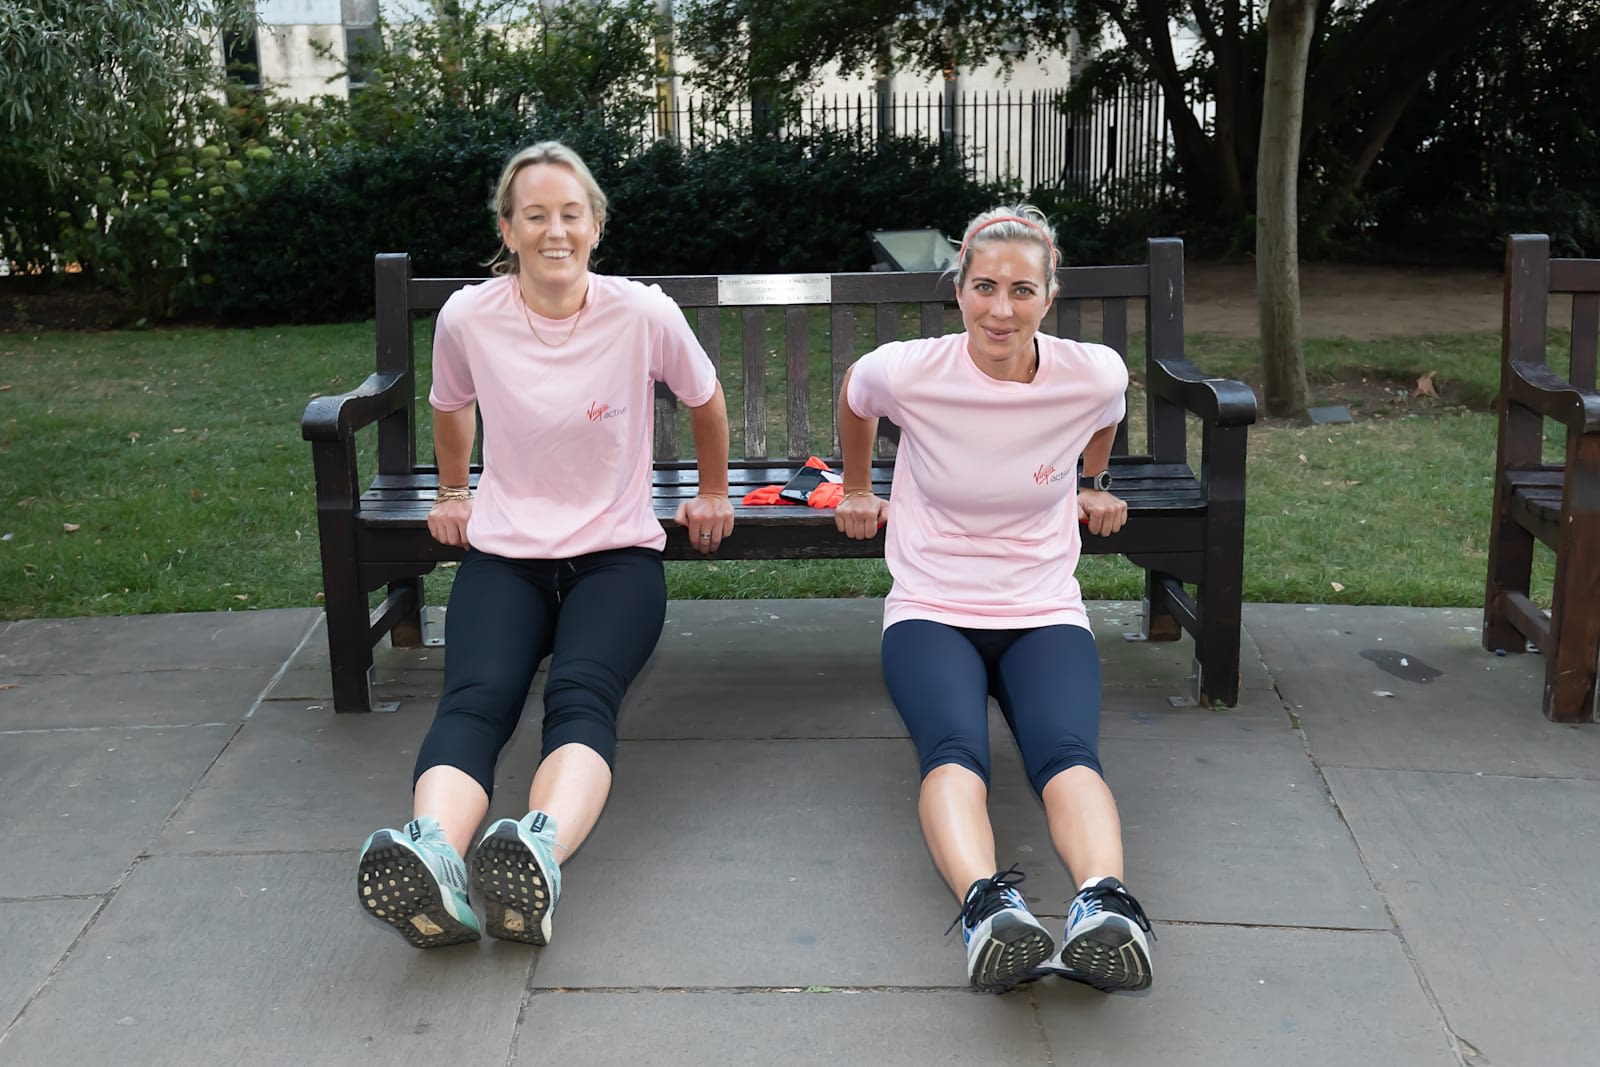 Holly Branson exercises on a park bench with another woman